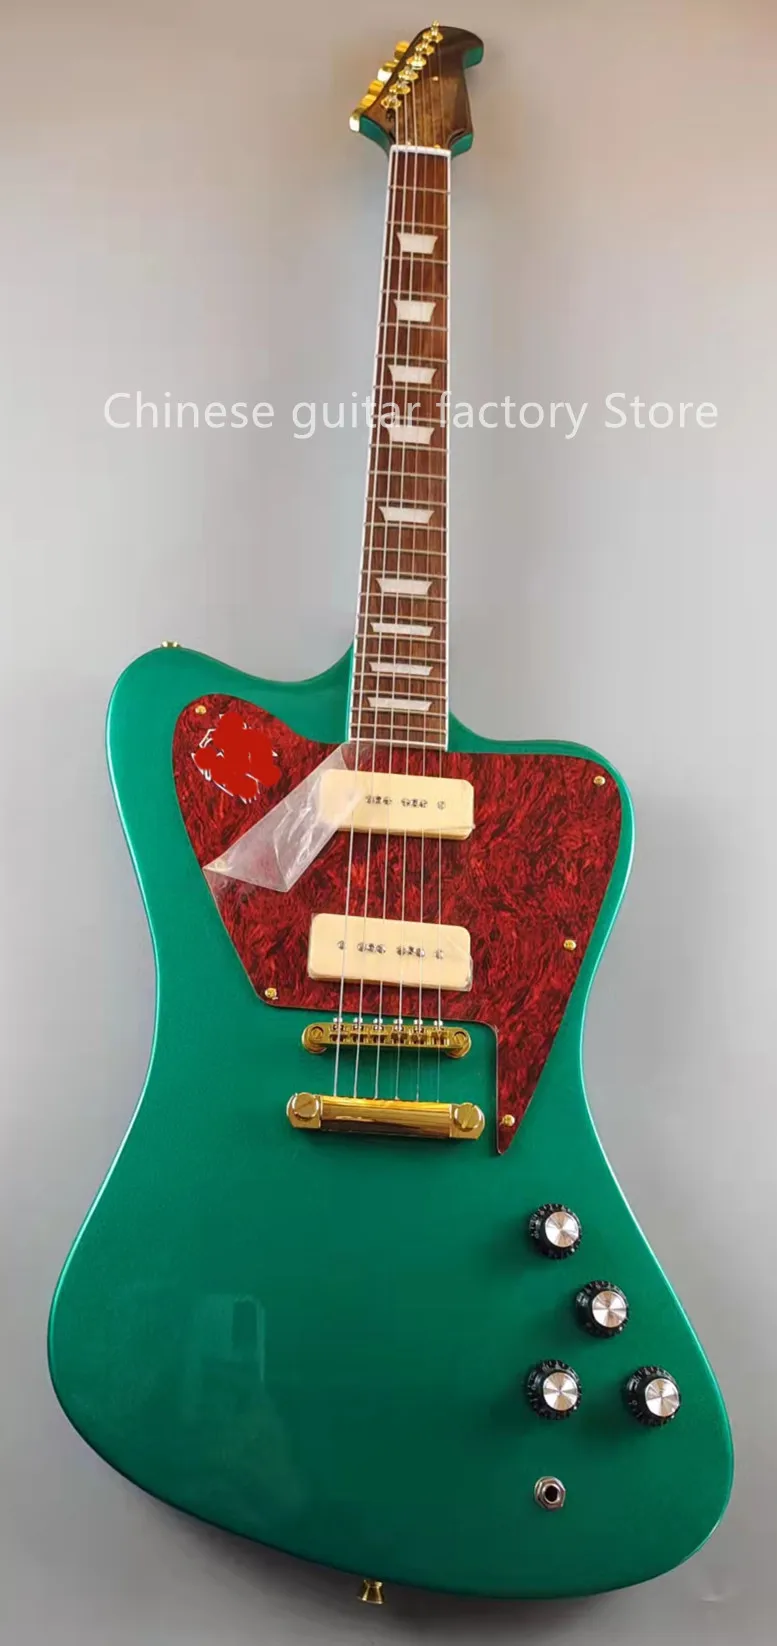 Cables Firebird electric guitar silvergreen flashes golden accessories P90 pickups mahogany body sold in stock fa